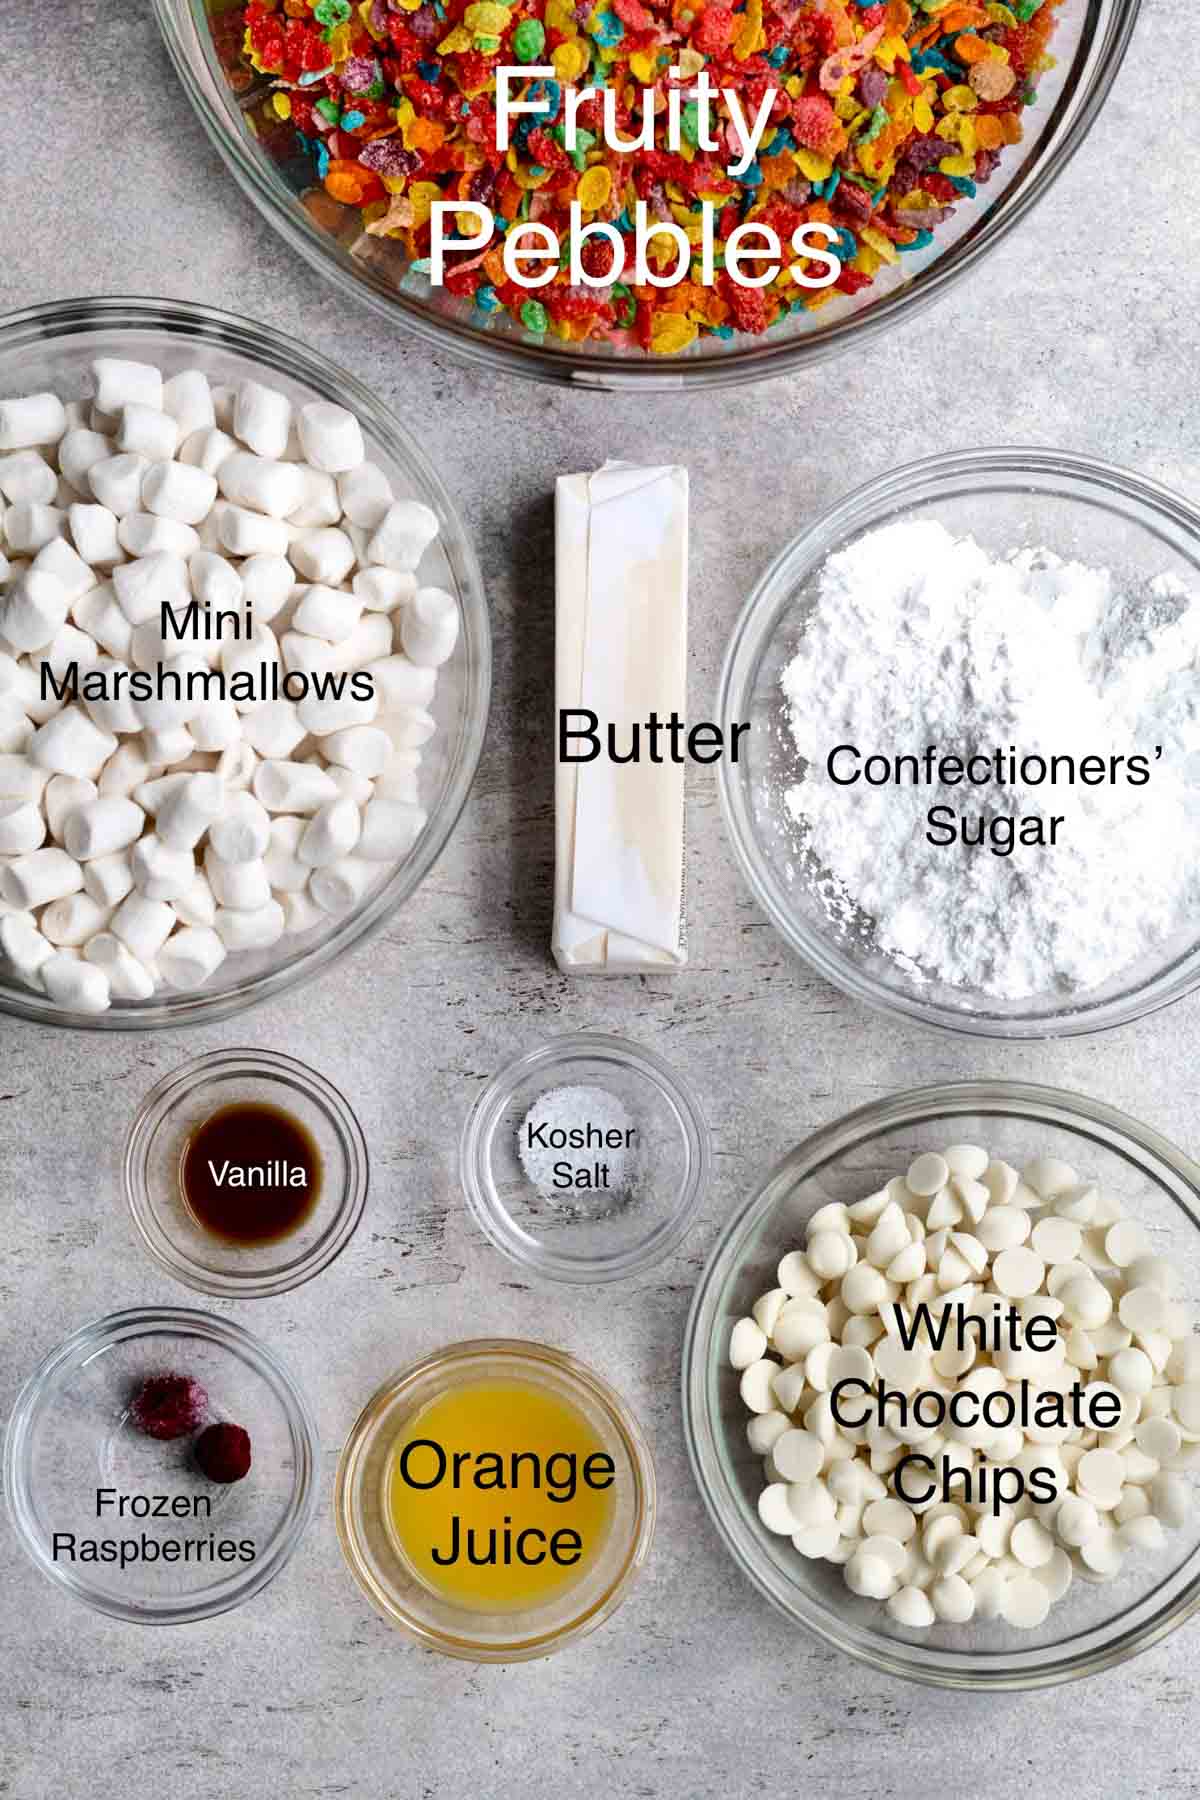 Fruity Pebbles, mini marshmallows, butter, confectioners' sugar, vanilla, kosher salt, white chocolate chips, orange juice, frozen raspberries in separate containers.